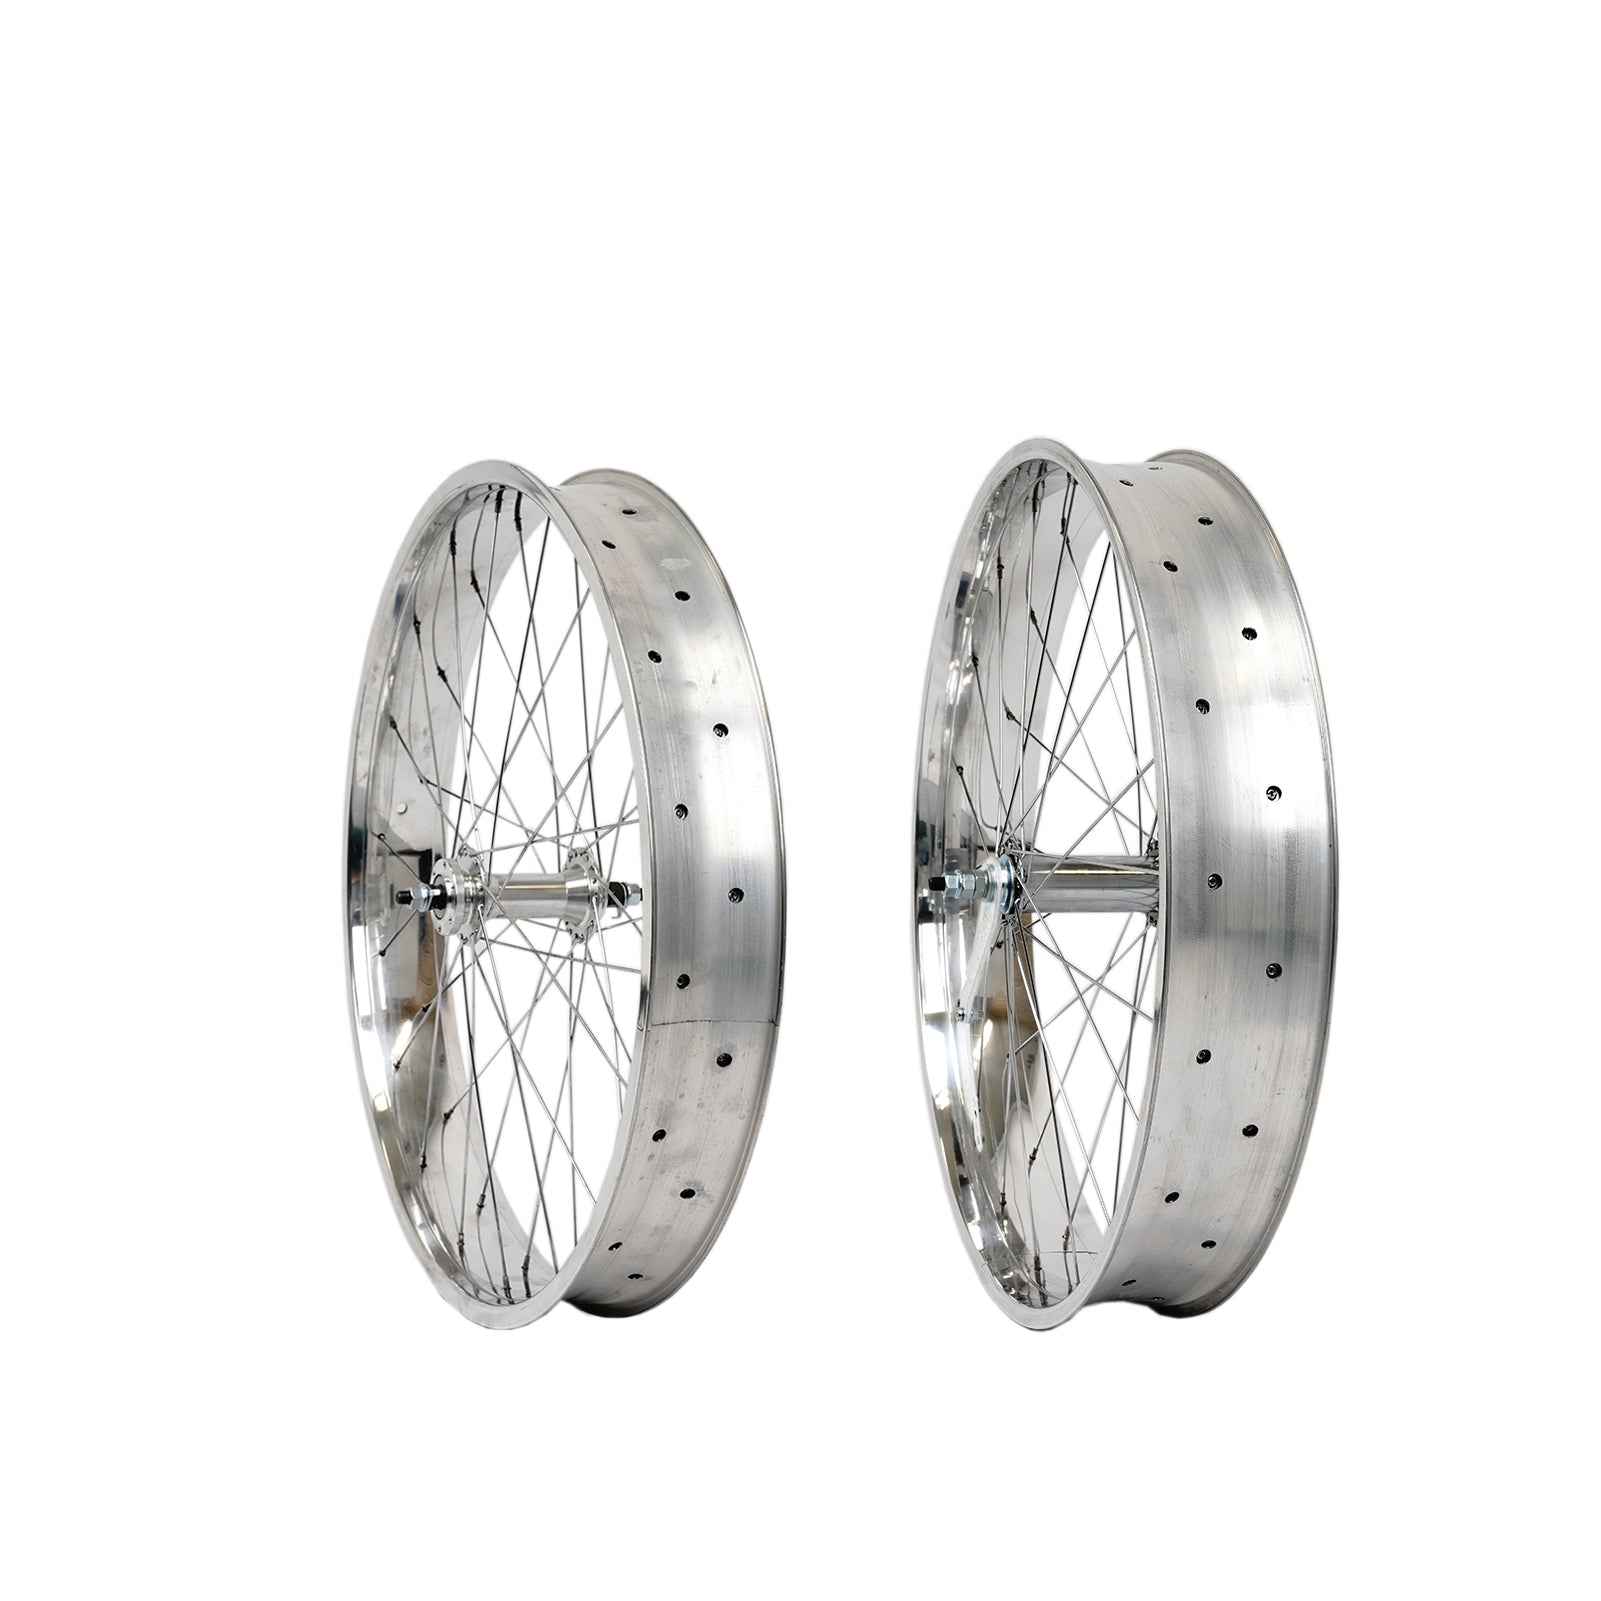 Tracer WH-D4C263613-PL Double Polished Fat Rim Wheelset with Coaster Brake.